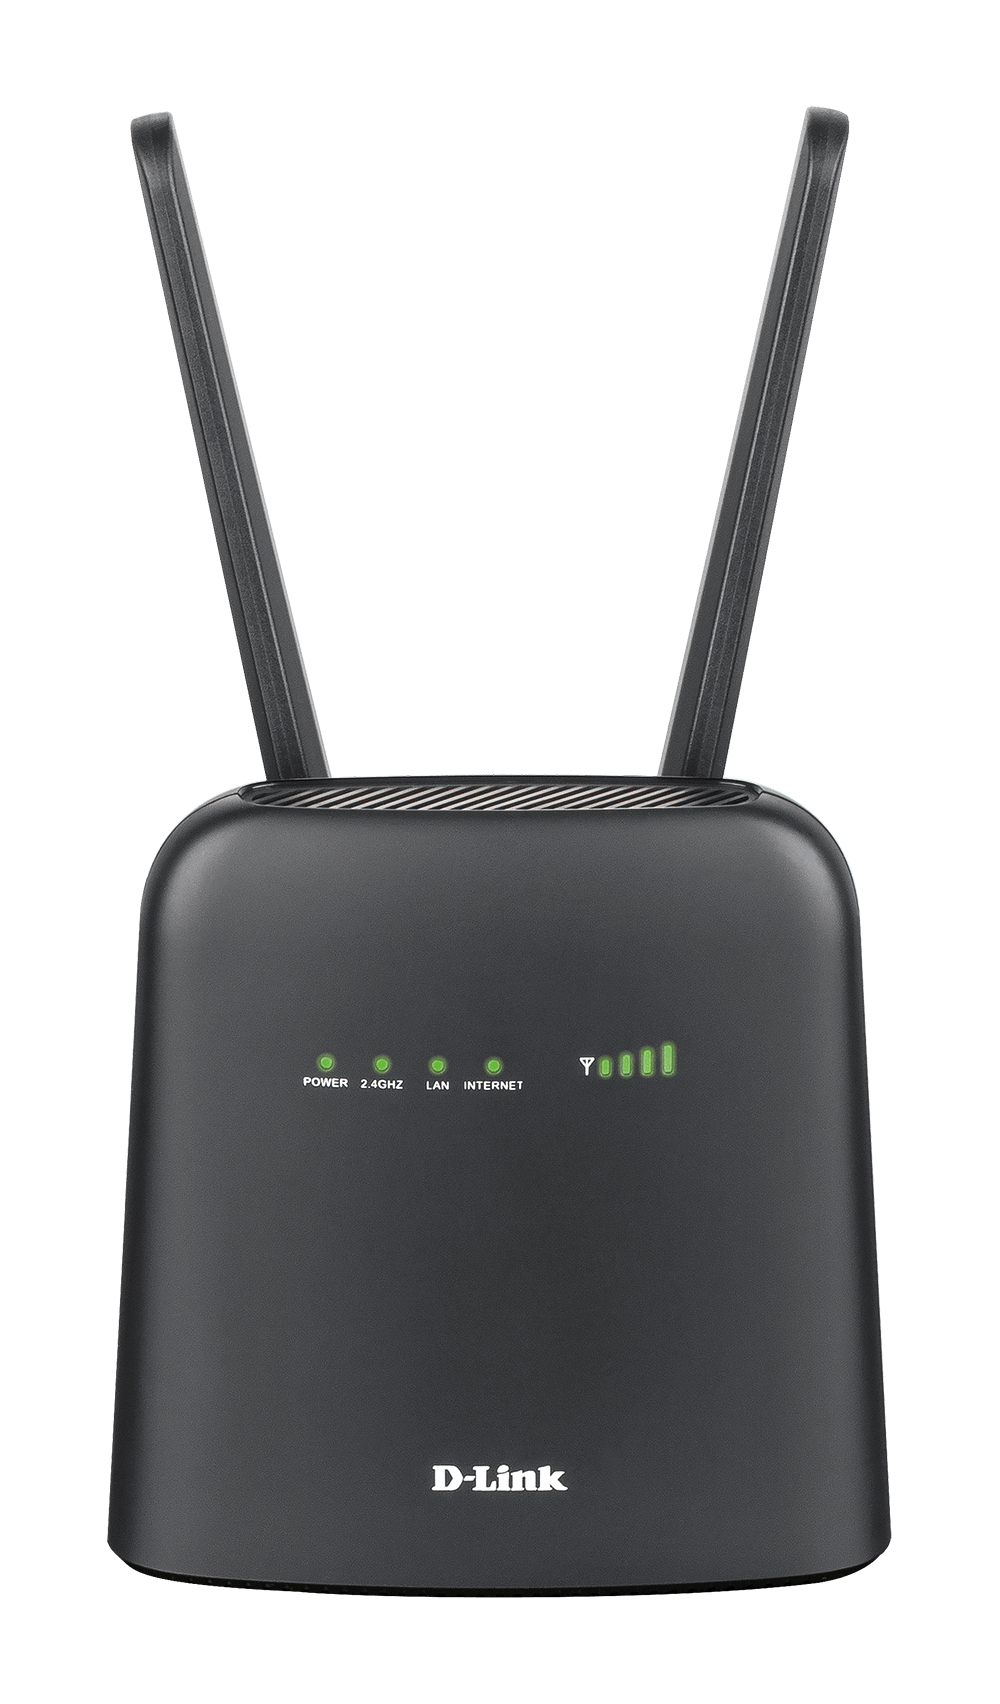 DWR-920 Wireless N300 4G LTE Router - front side.